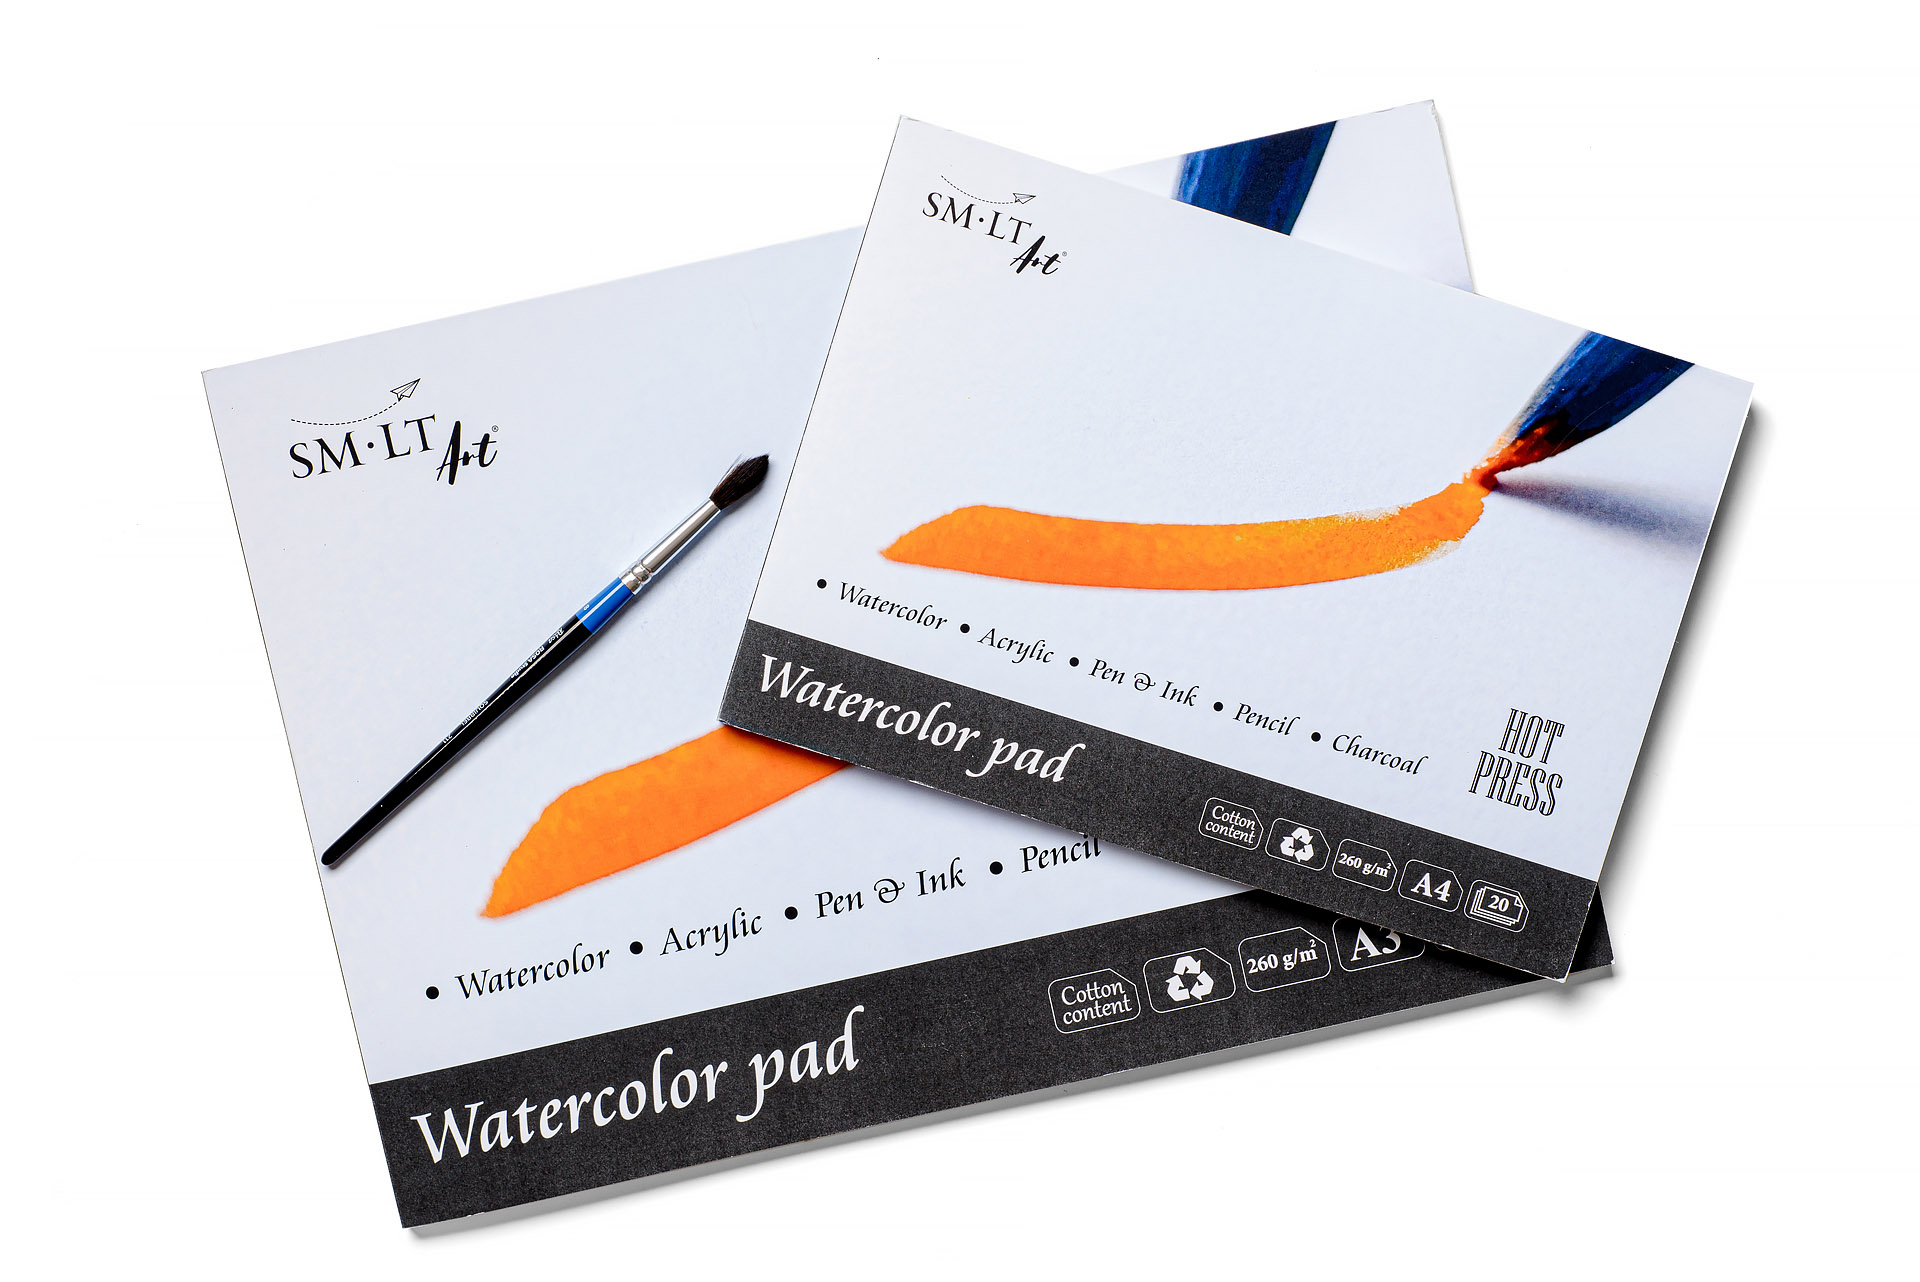 Hot Press Watercolour pads from SMLT 